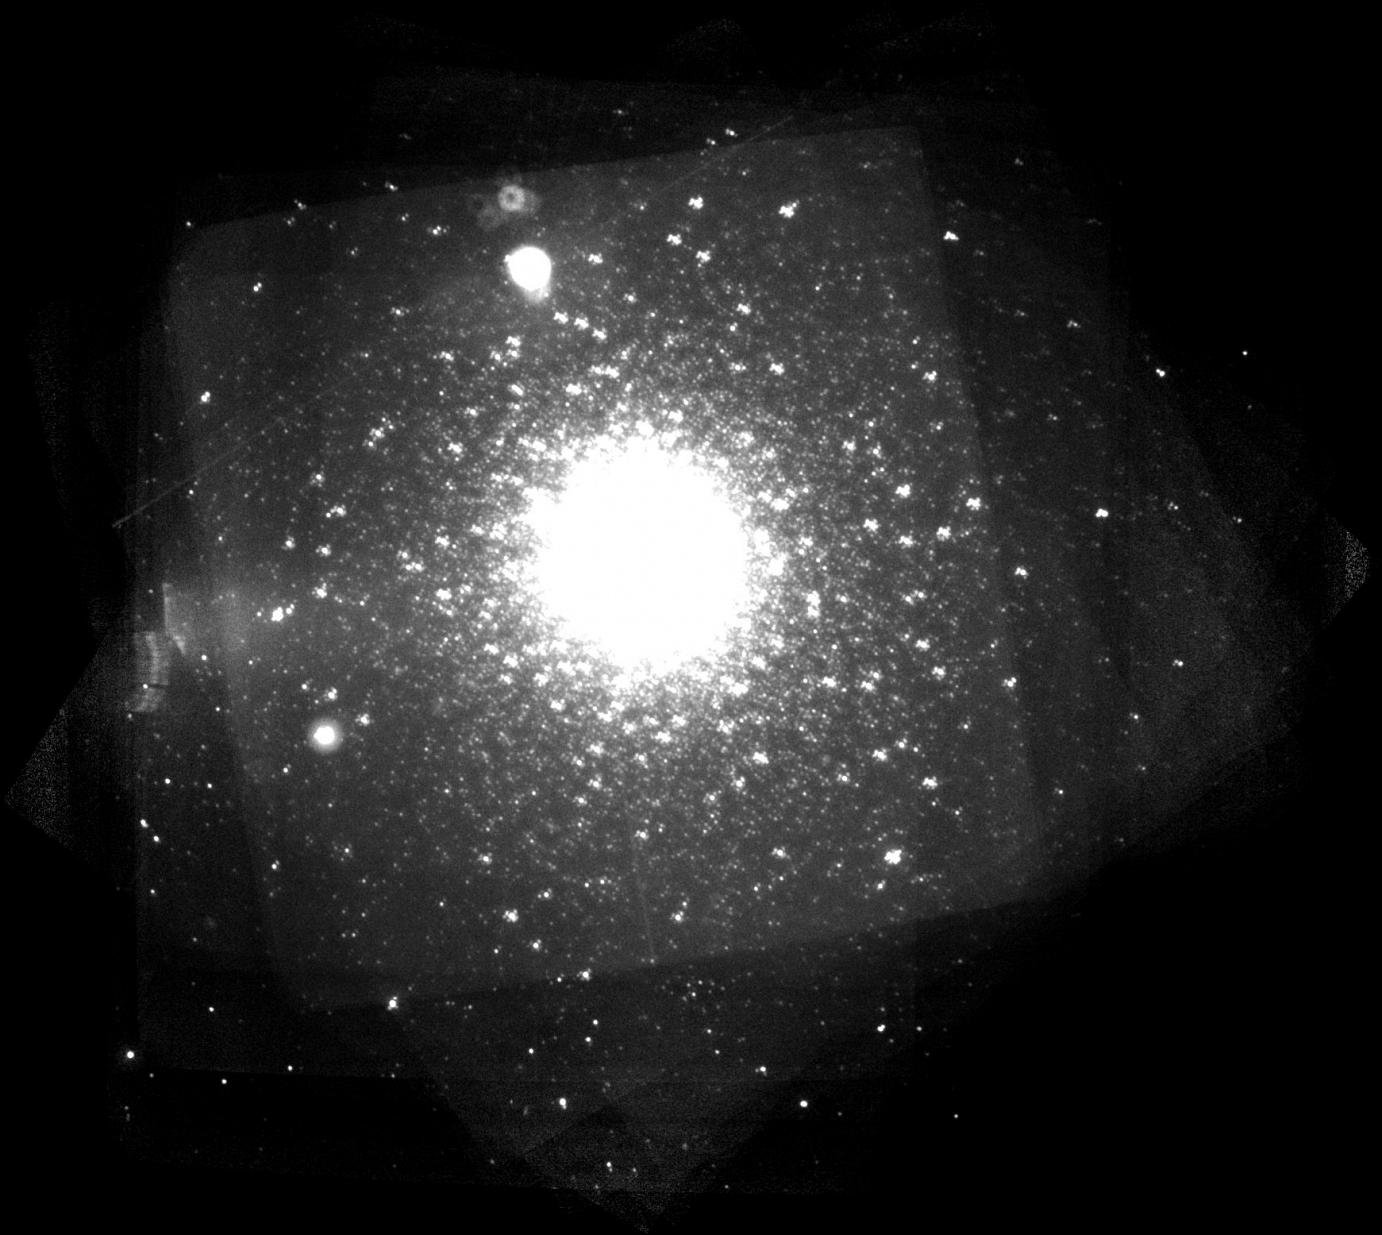 Uncorrected mosaic of Messier 15